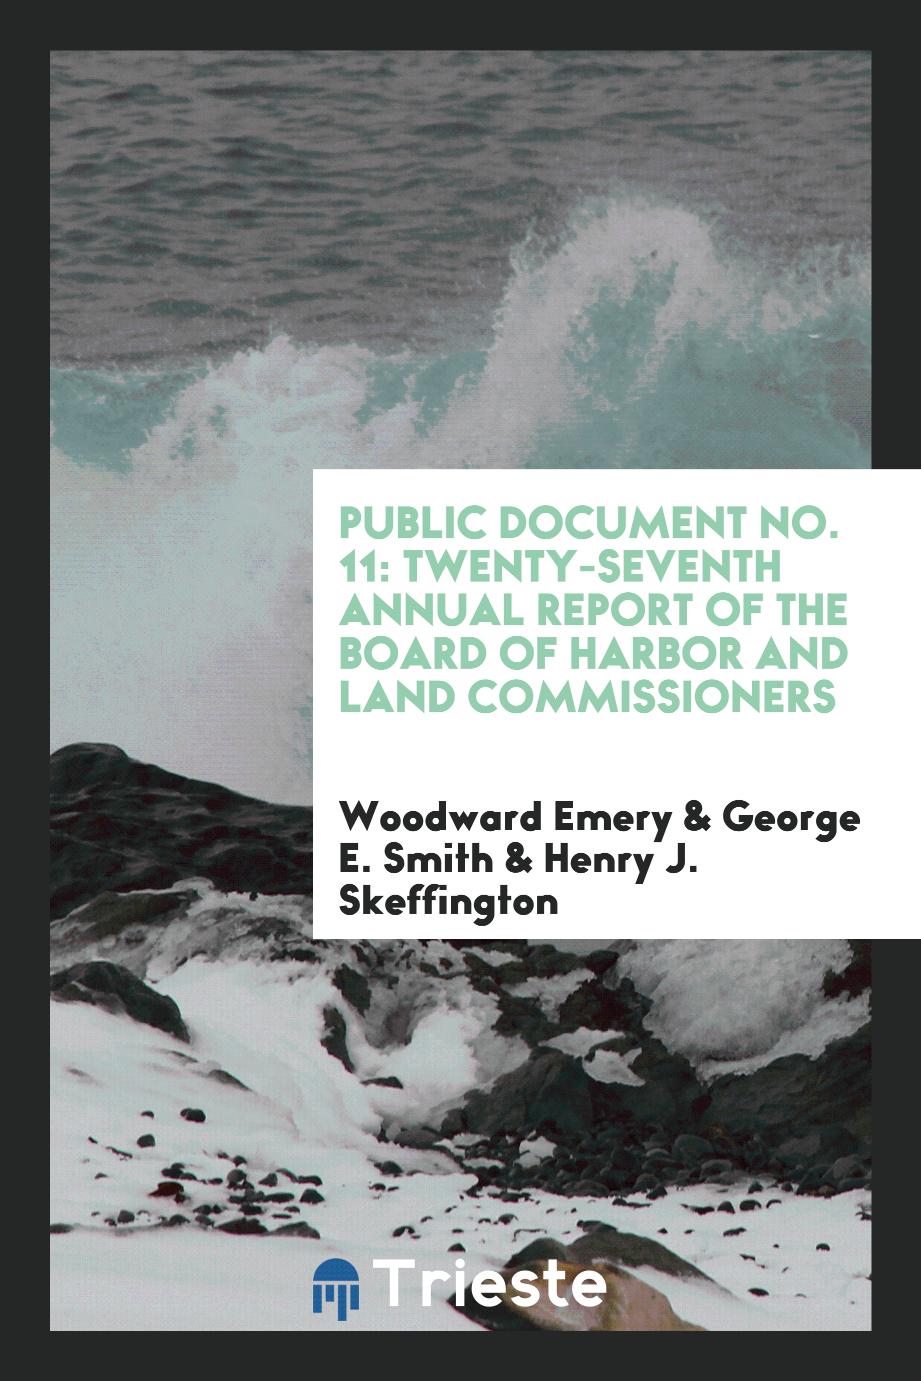 Public Document No. 11: Twenty-seventh Annual Report of the Board of Harbor and Land Commissioners